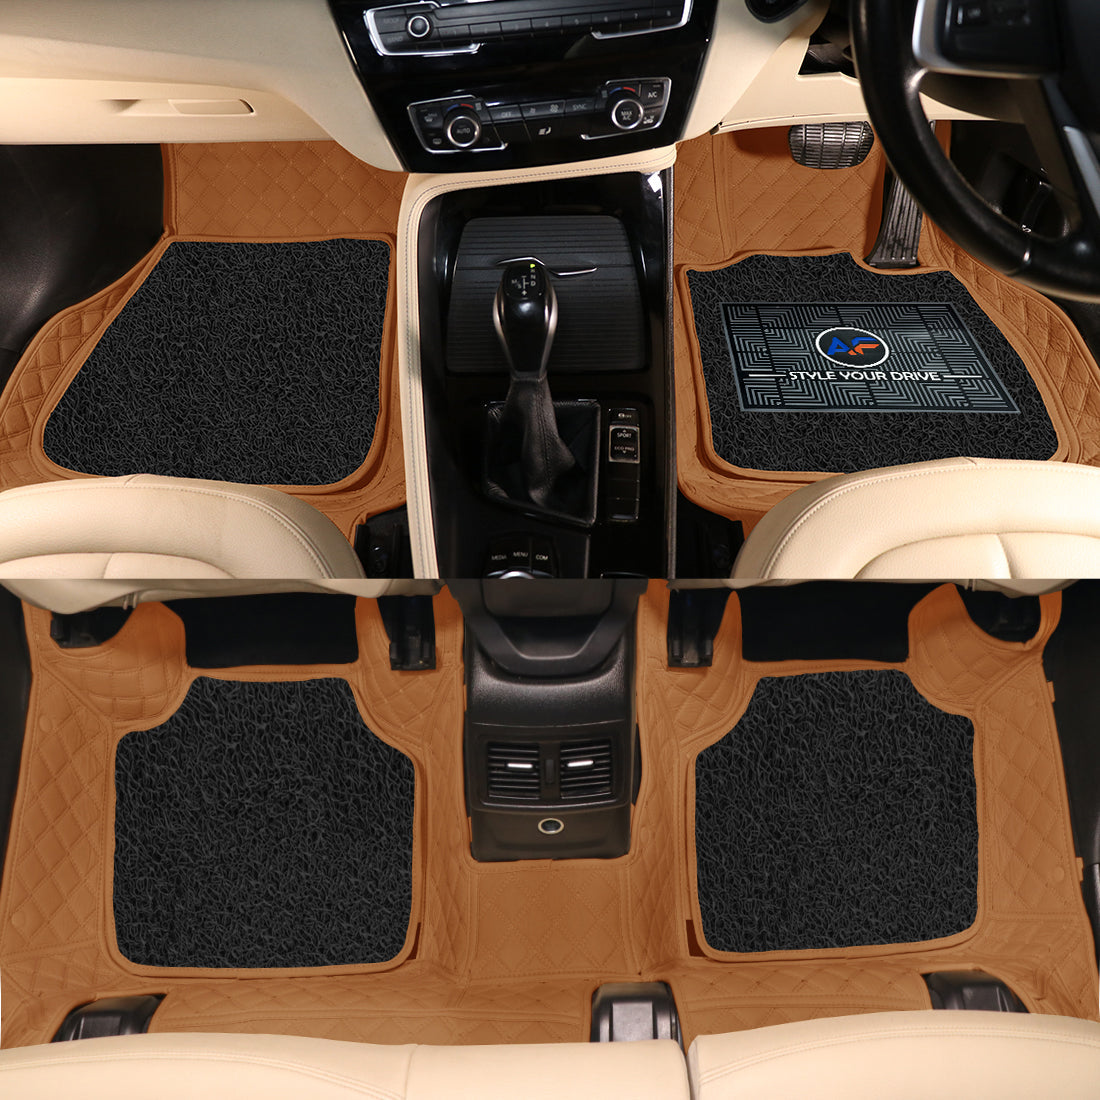 Chevrolet Beat-2010-13-7D Luxury Car Mat, All Weather Proof, Anti-Skid, 100% Waterproof & Odorless with Unique Diamond Fish Design (24mm Luxury PU Leather, 2 Rows)